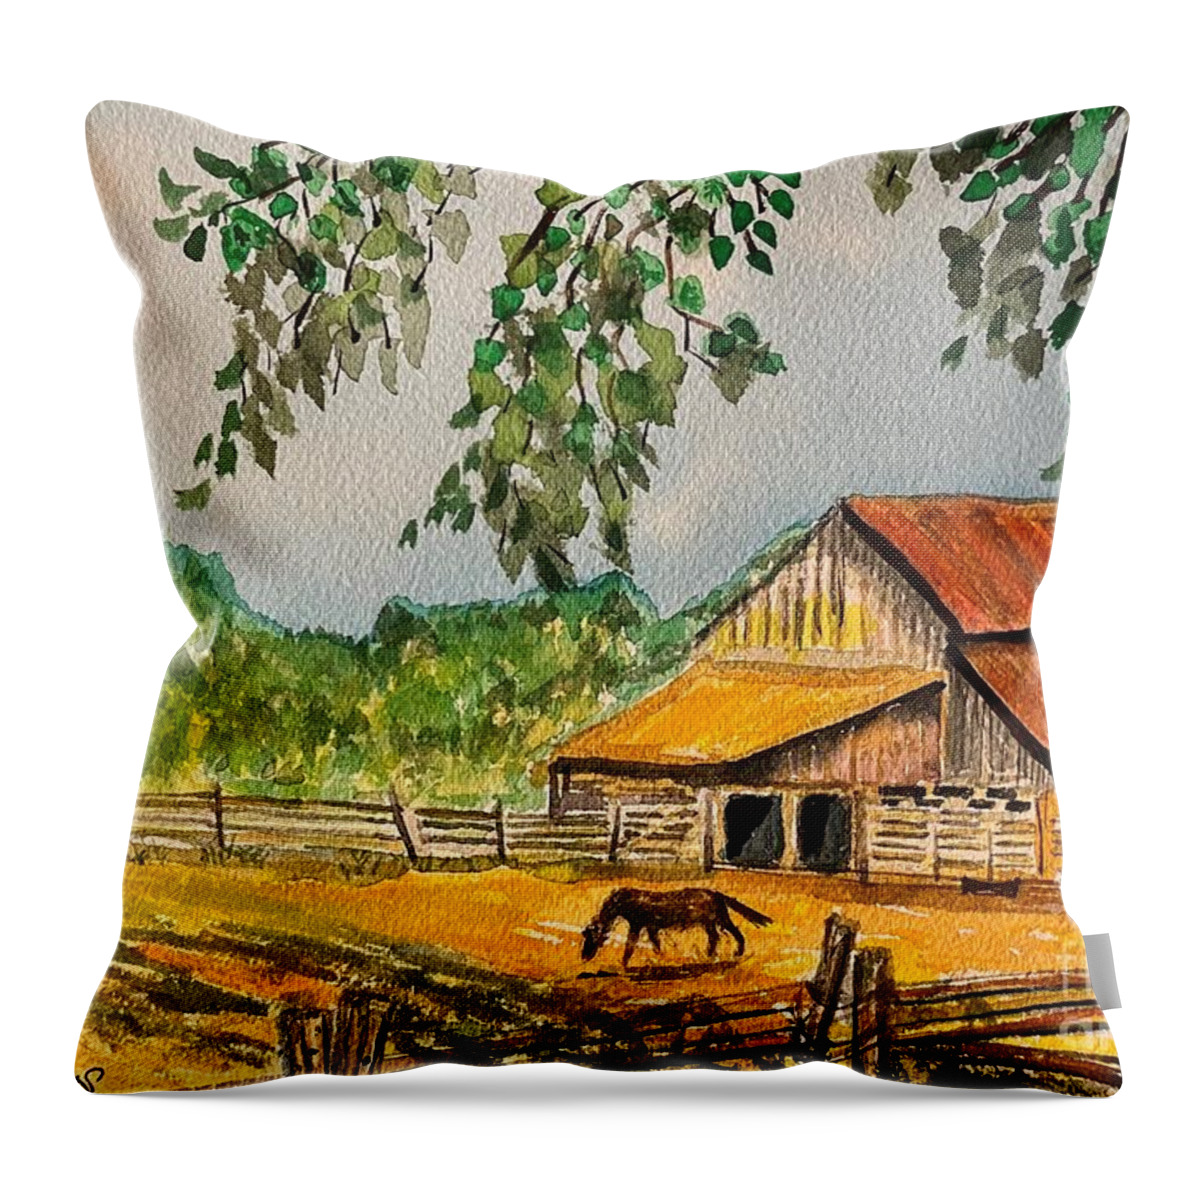 Watercolour Throw Pillow featuring the painting Old Barn in Napa by Monika Shepherdson